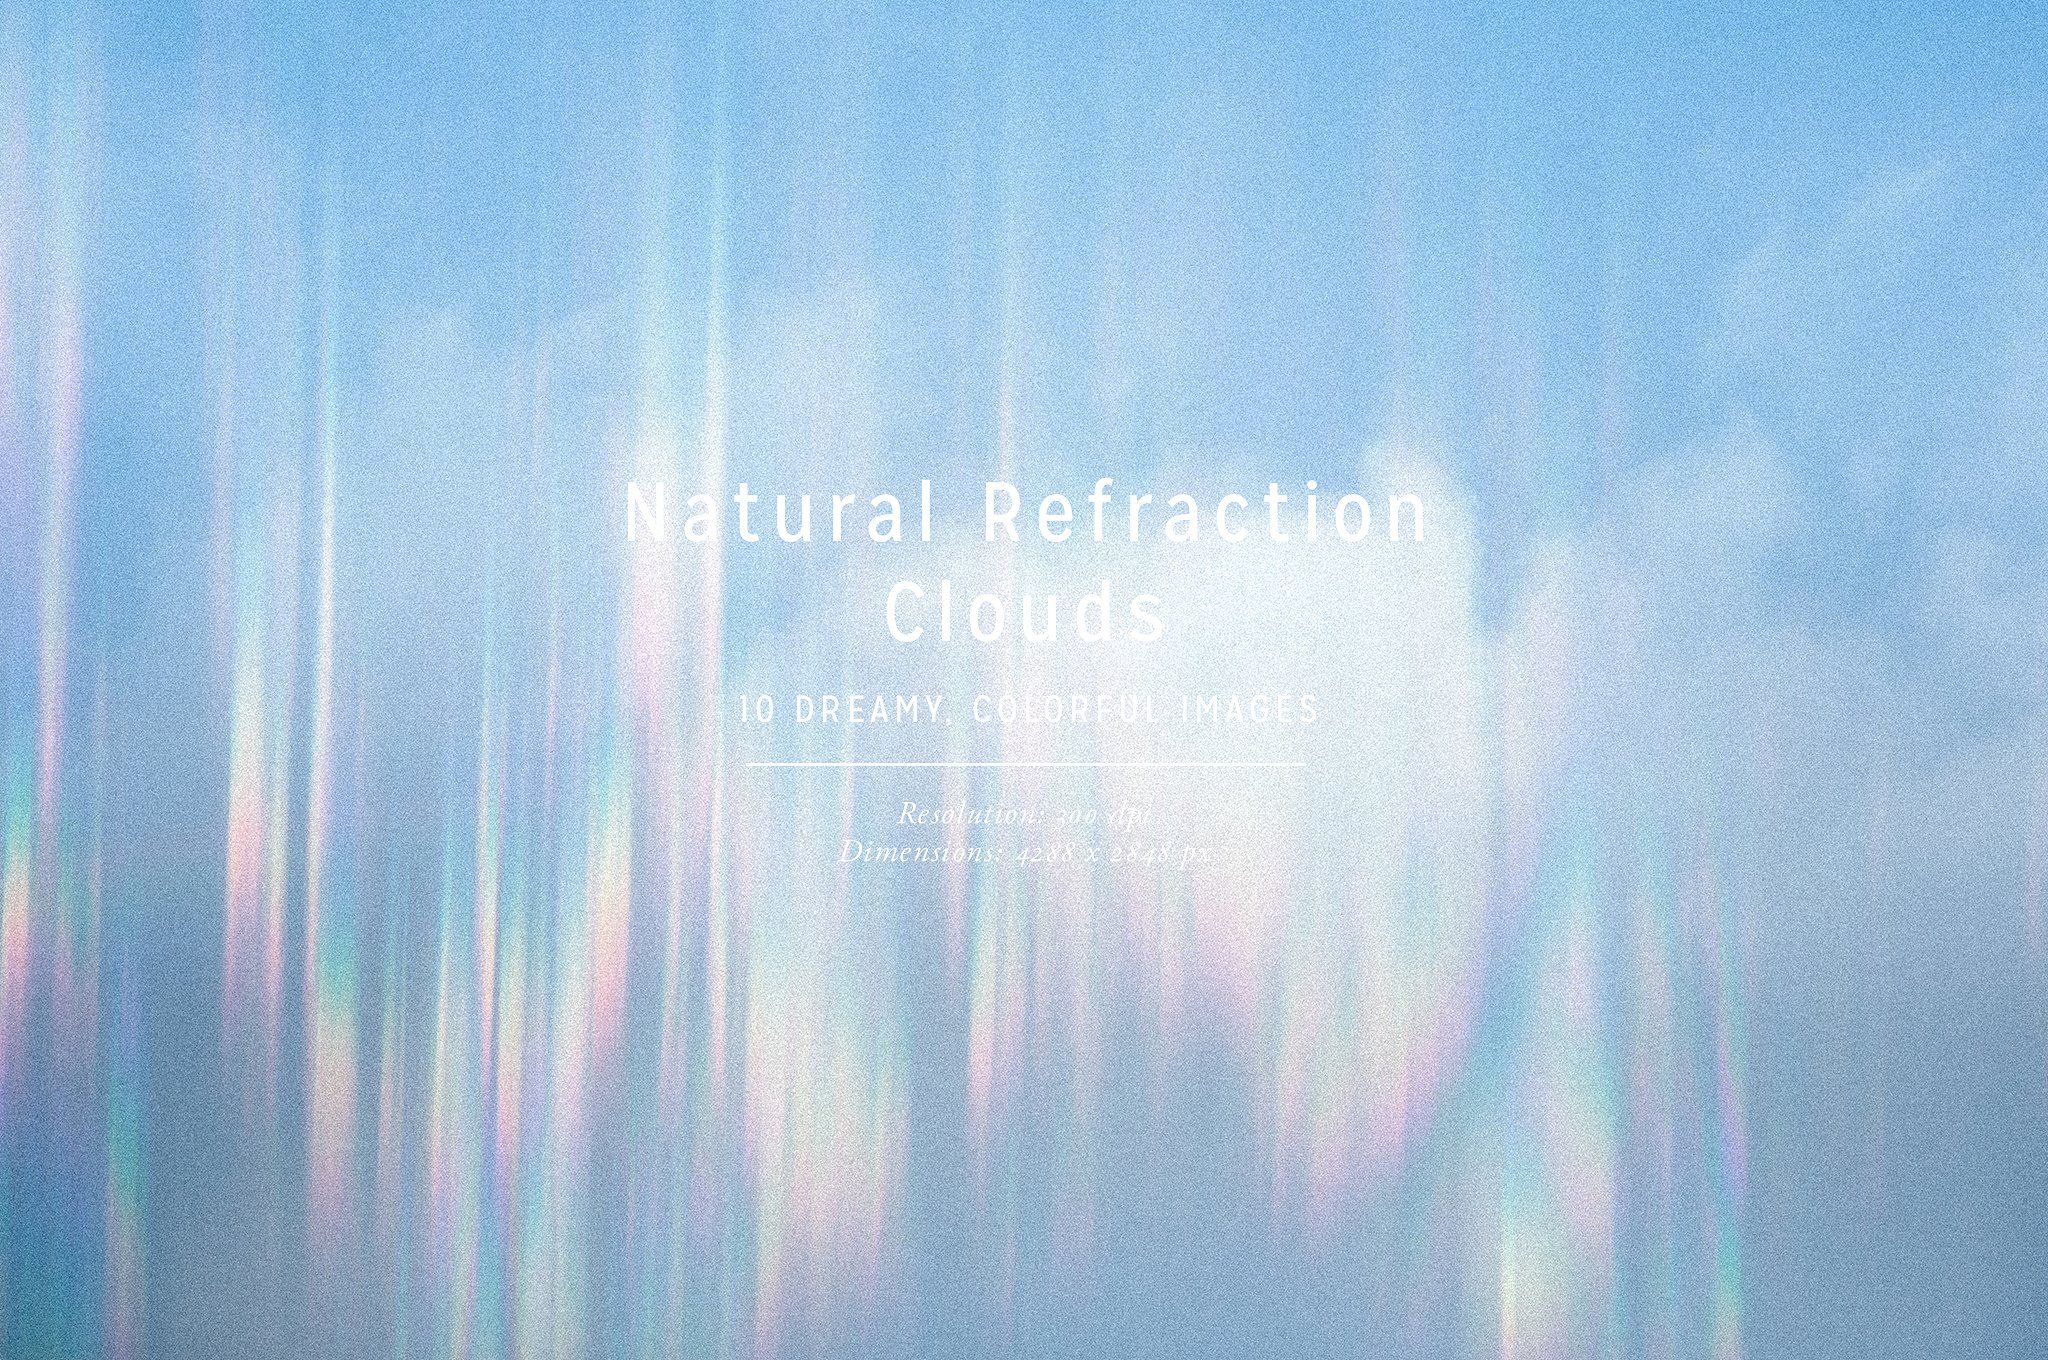 Natural Refraction: Clouds. Clouds, Refraction, My image